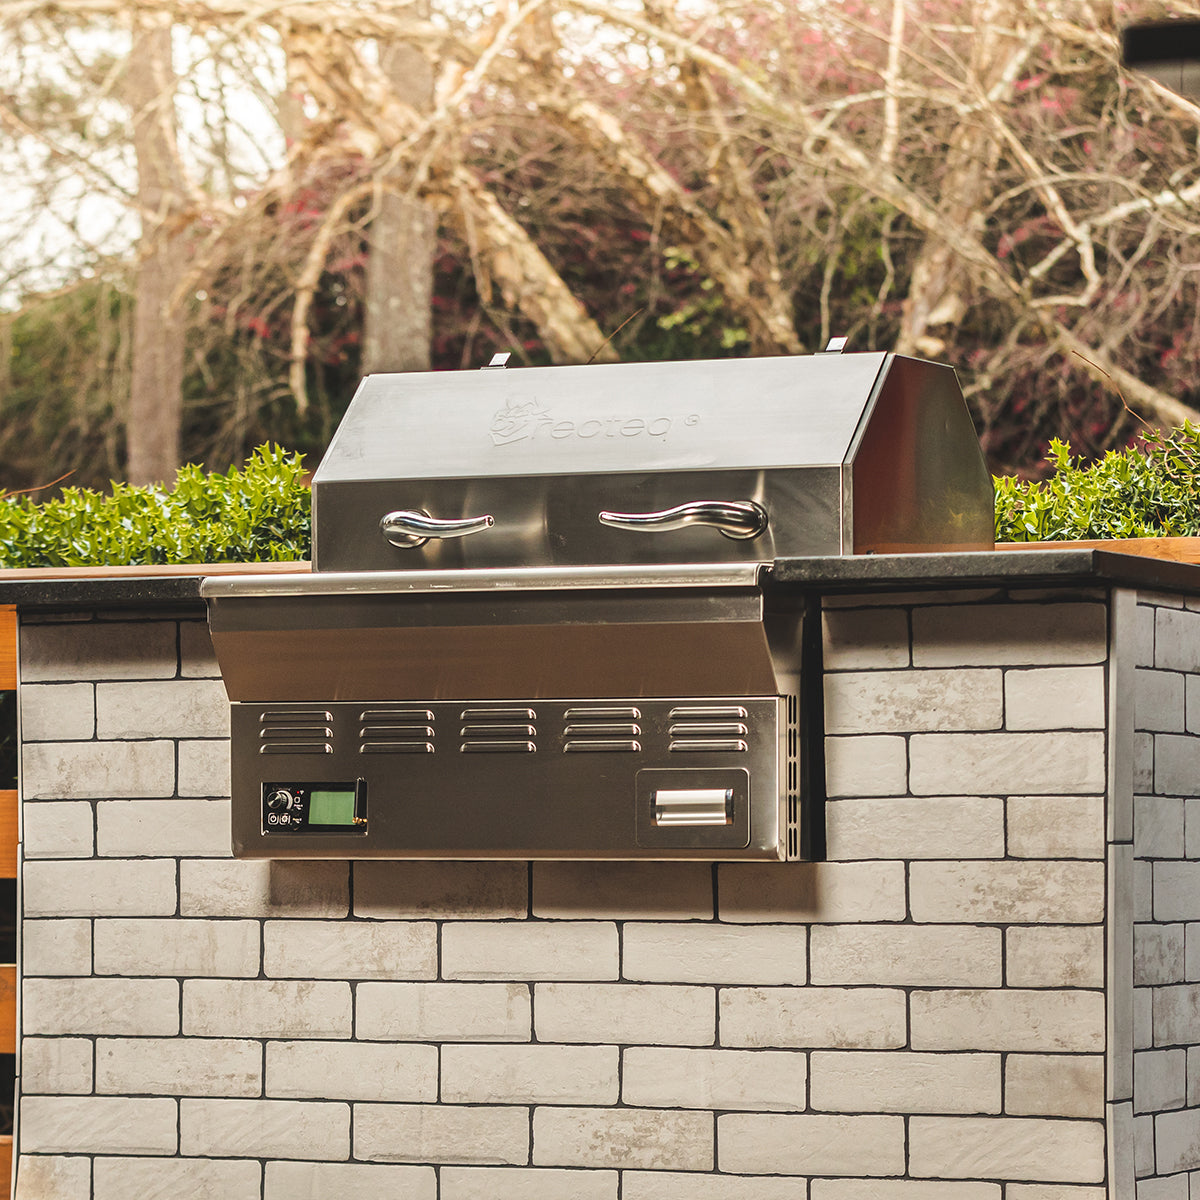 RECTEQ Bull RT-700 Pellet Grill Review - Learn to Smoke Meat with Jeff  Phillips